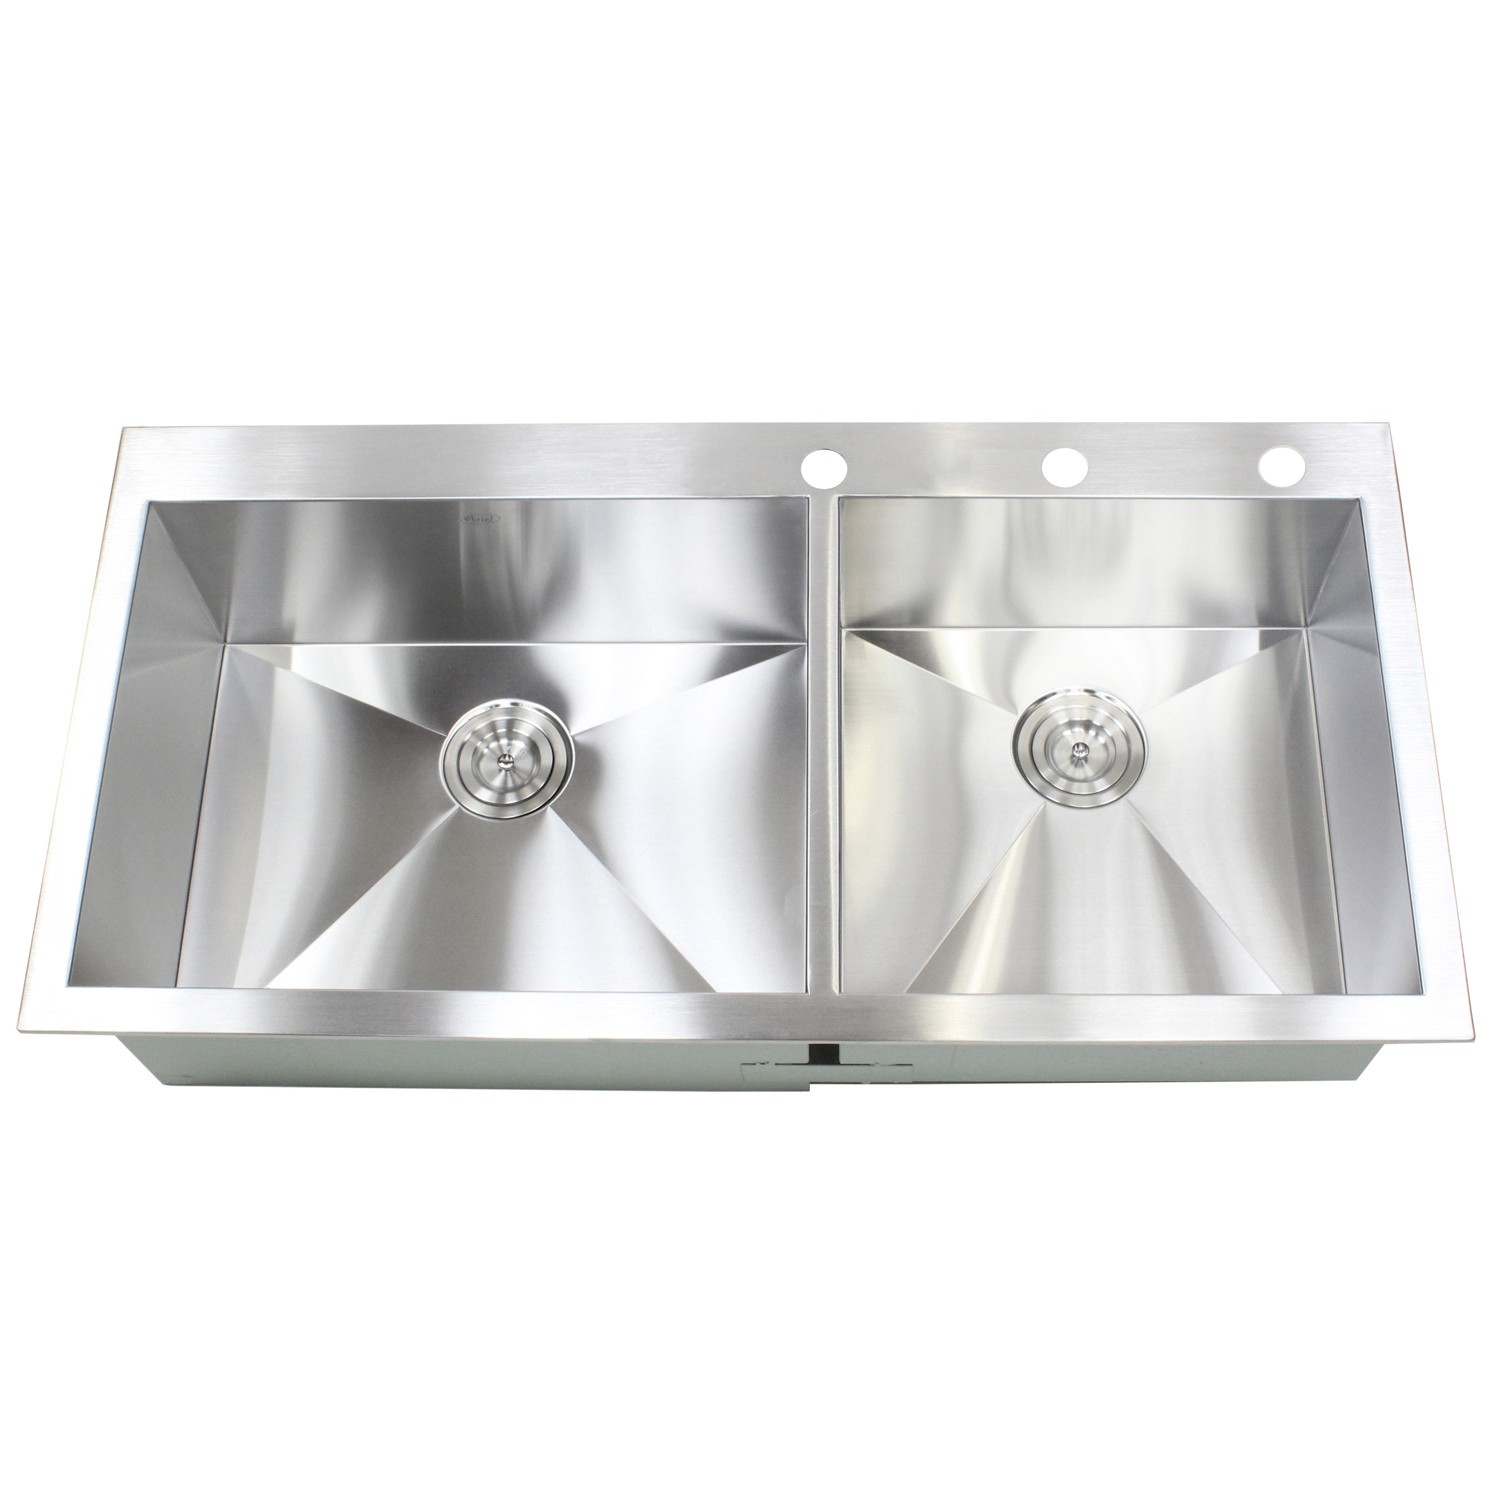 43 Inch Top-Mount / Drop-In Stainless Steel Double Bowl Kitchen Sink 43 Inch Stainless Steel Sink